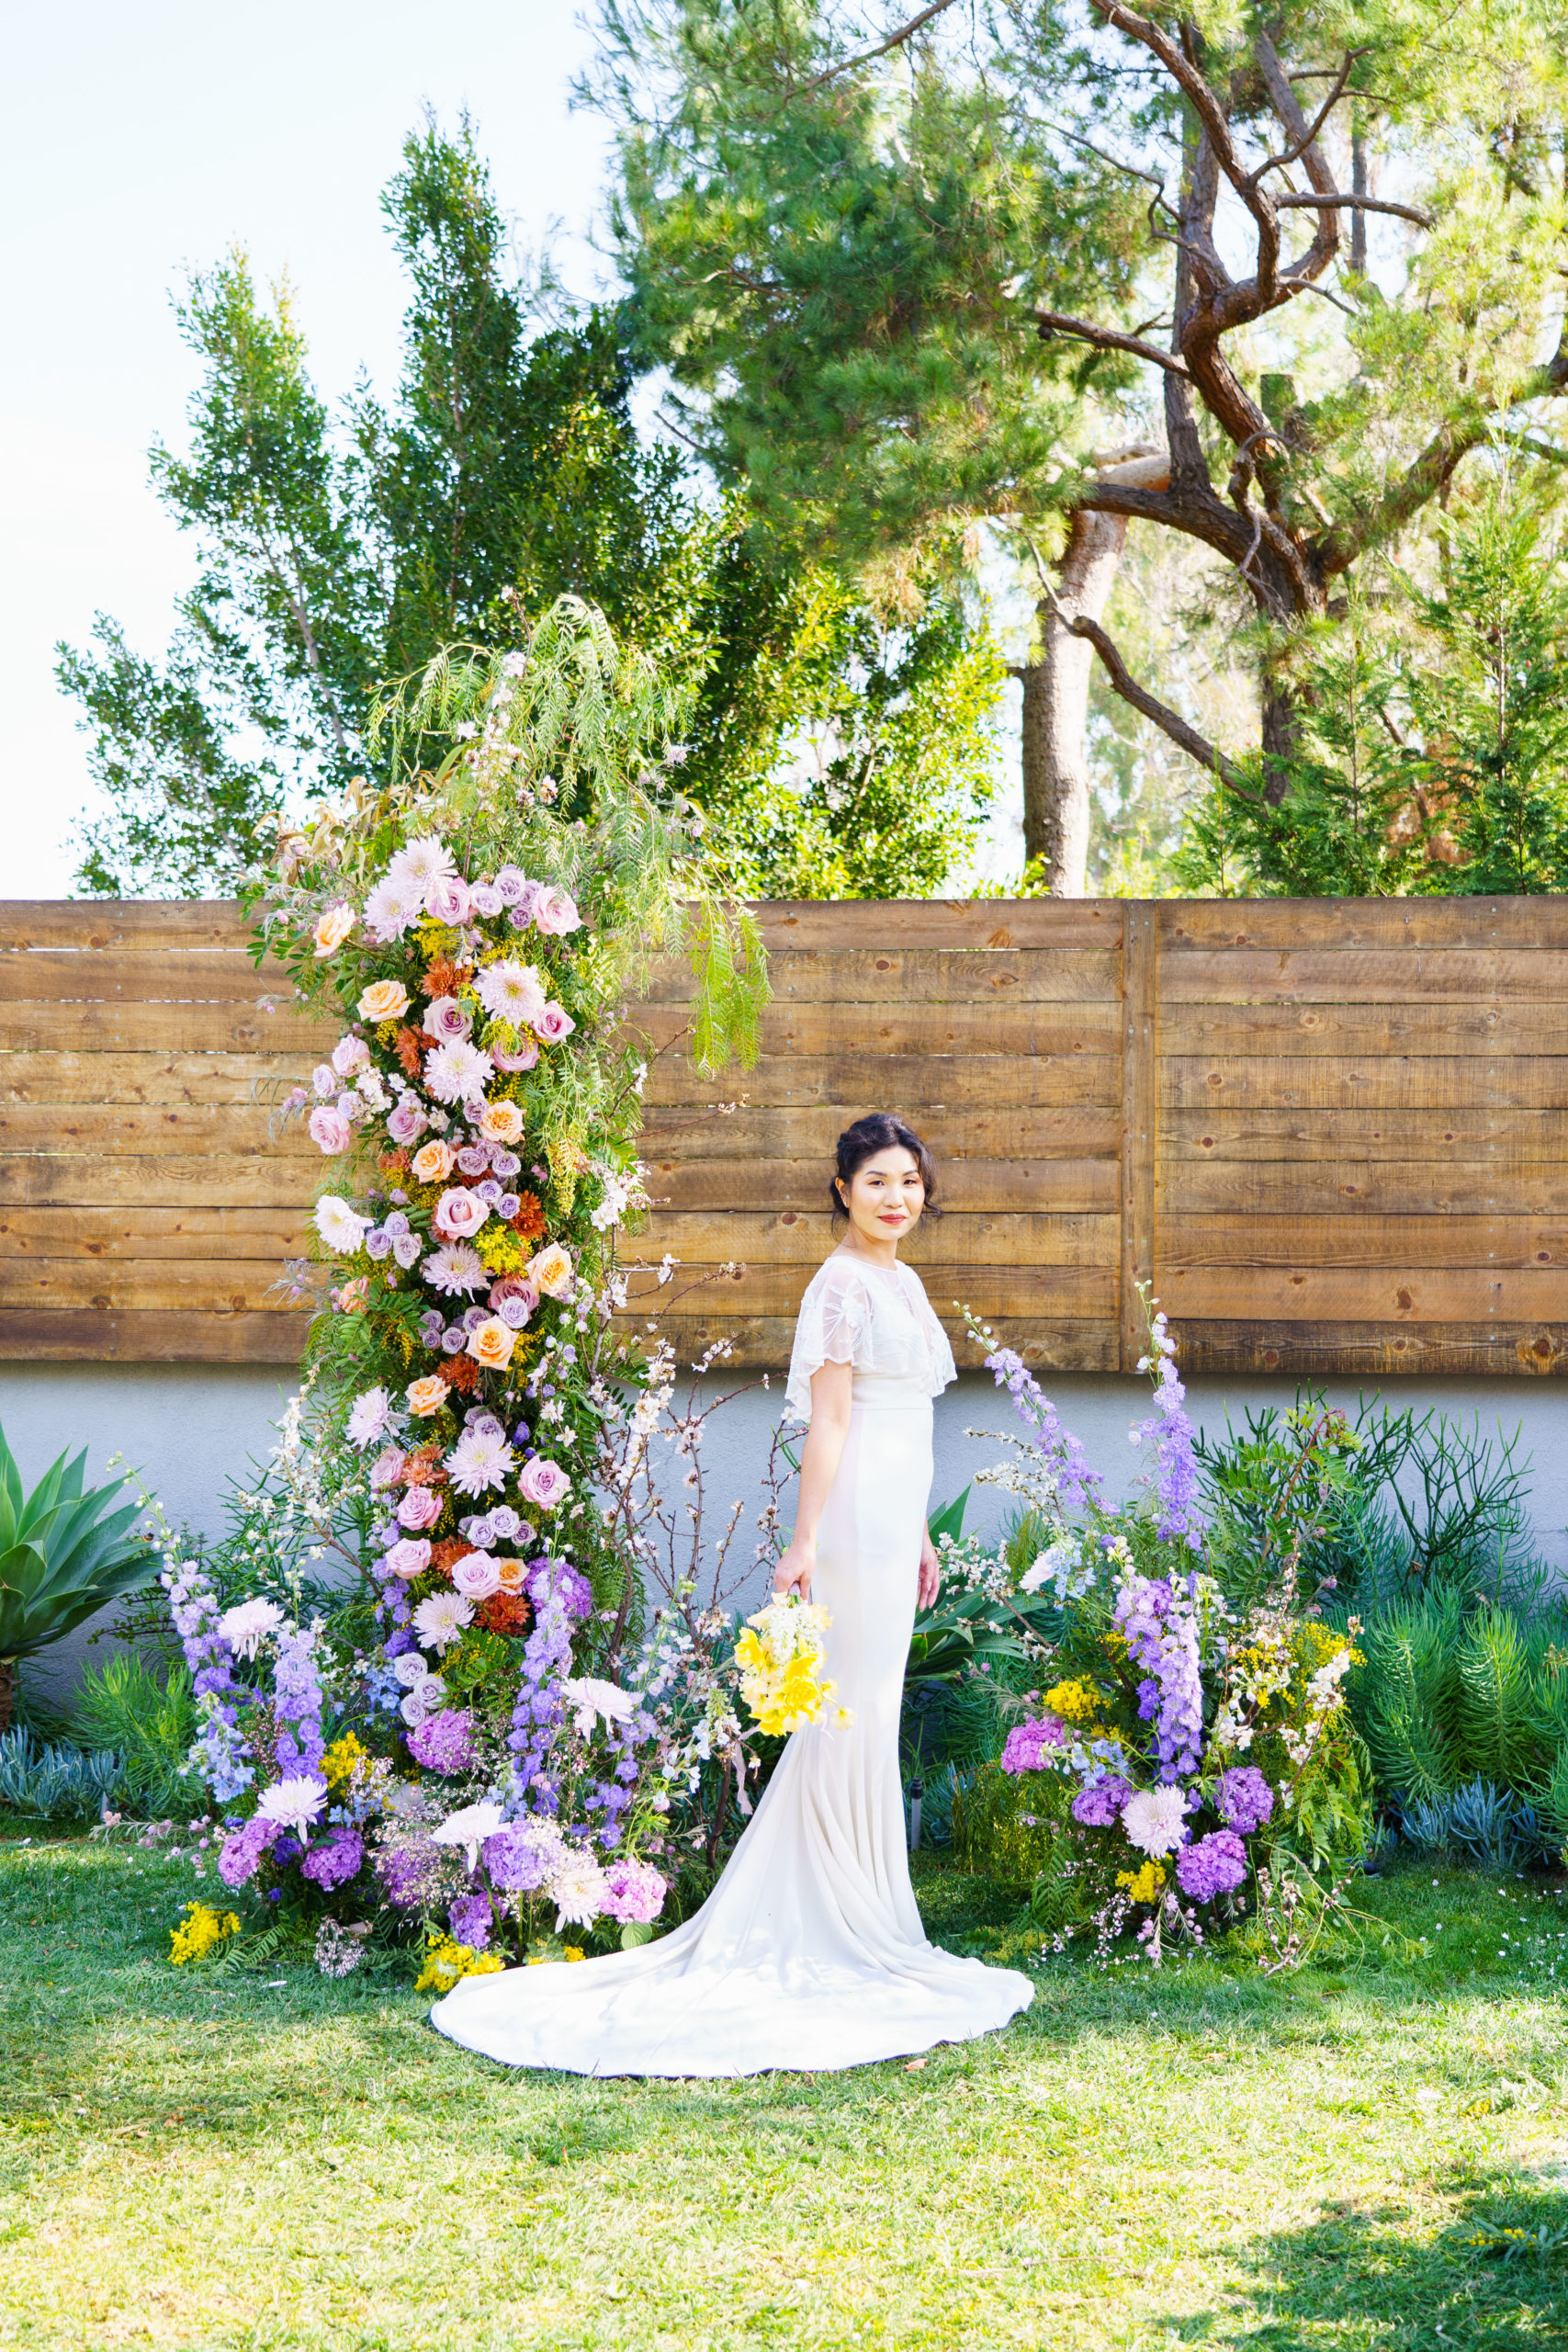 Colorful Spring garden inspired wedding arch with a beautiful Asian bride holding a bouquet